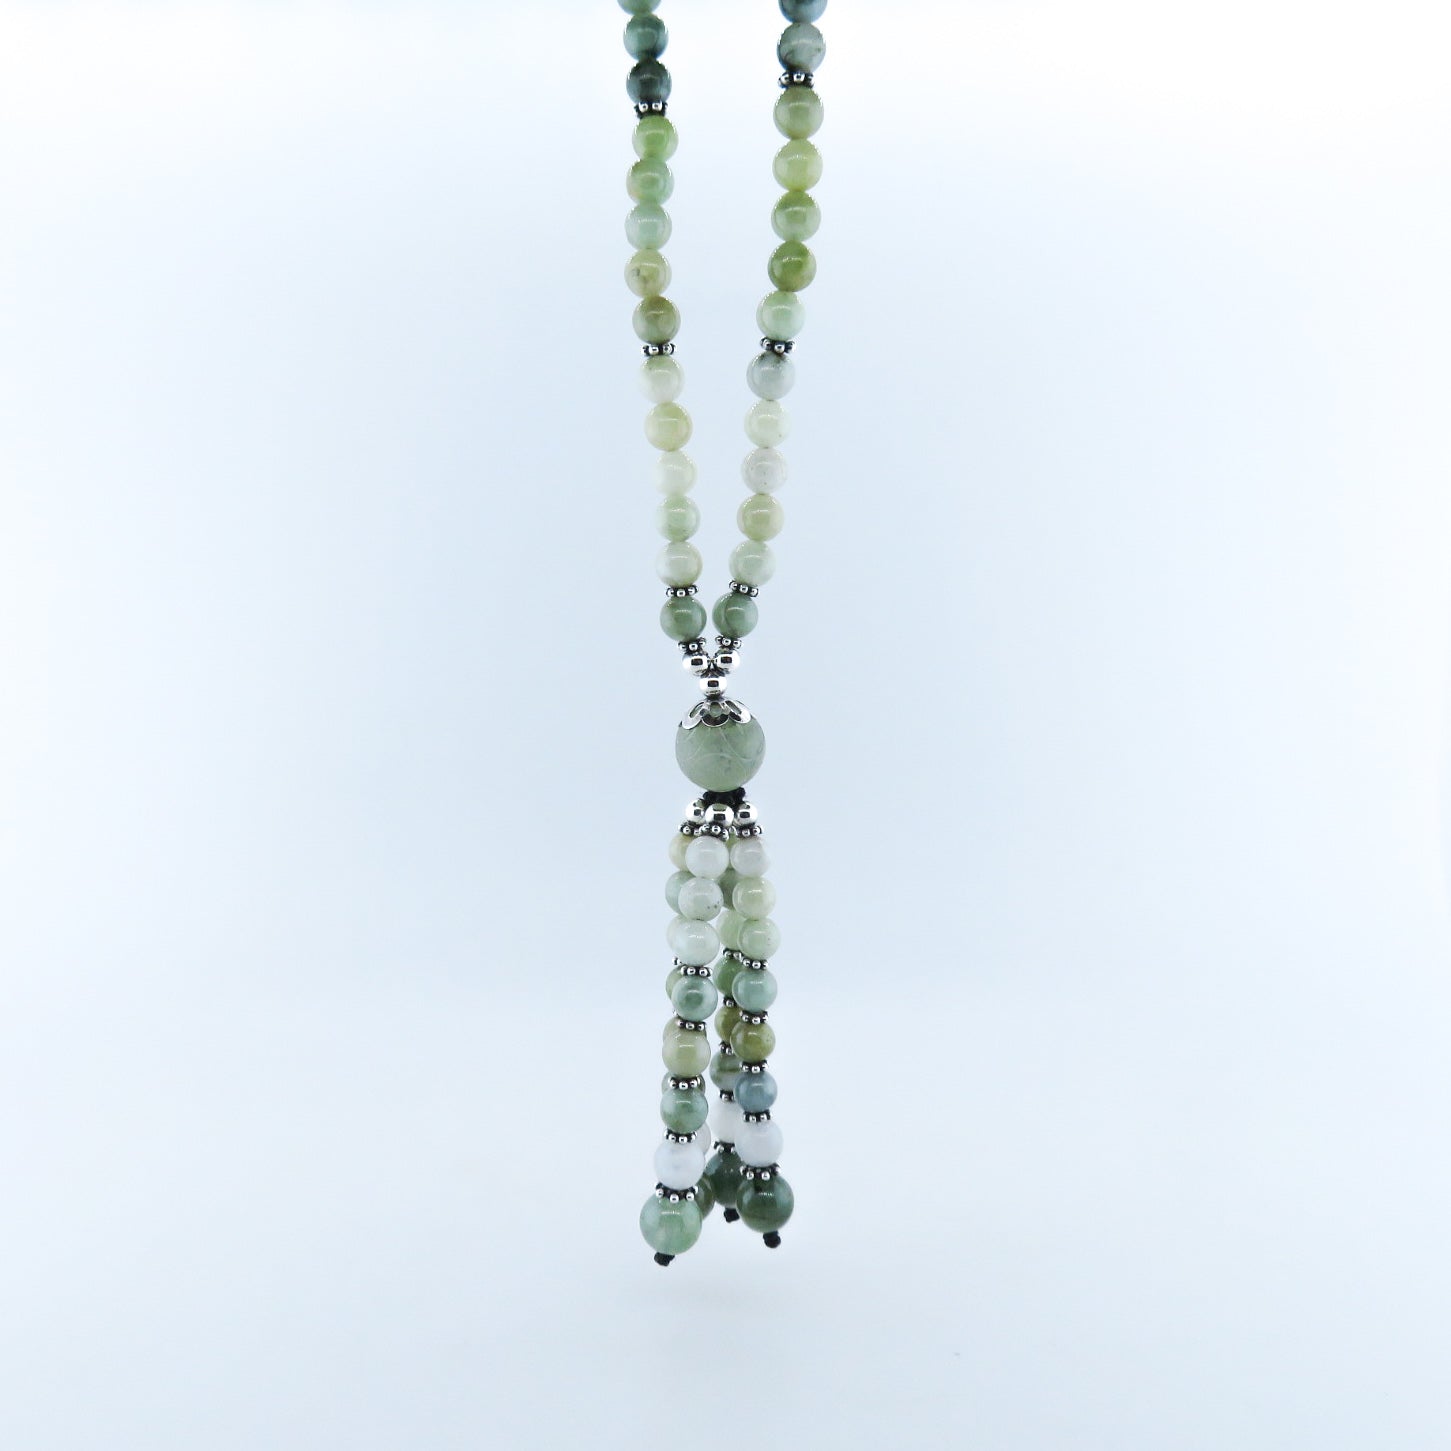 Jade Beads Necklace with Silver Beads